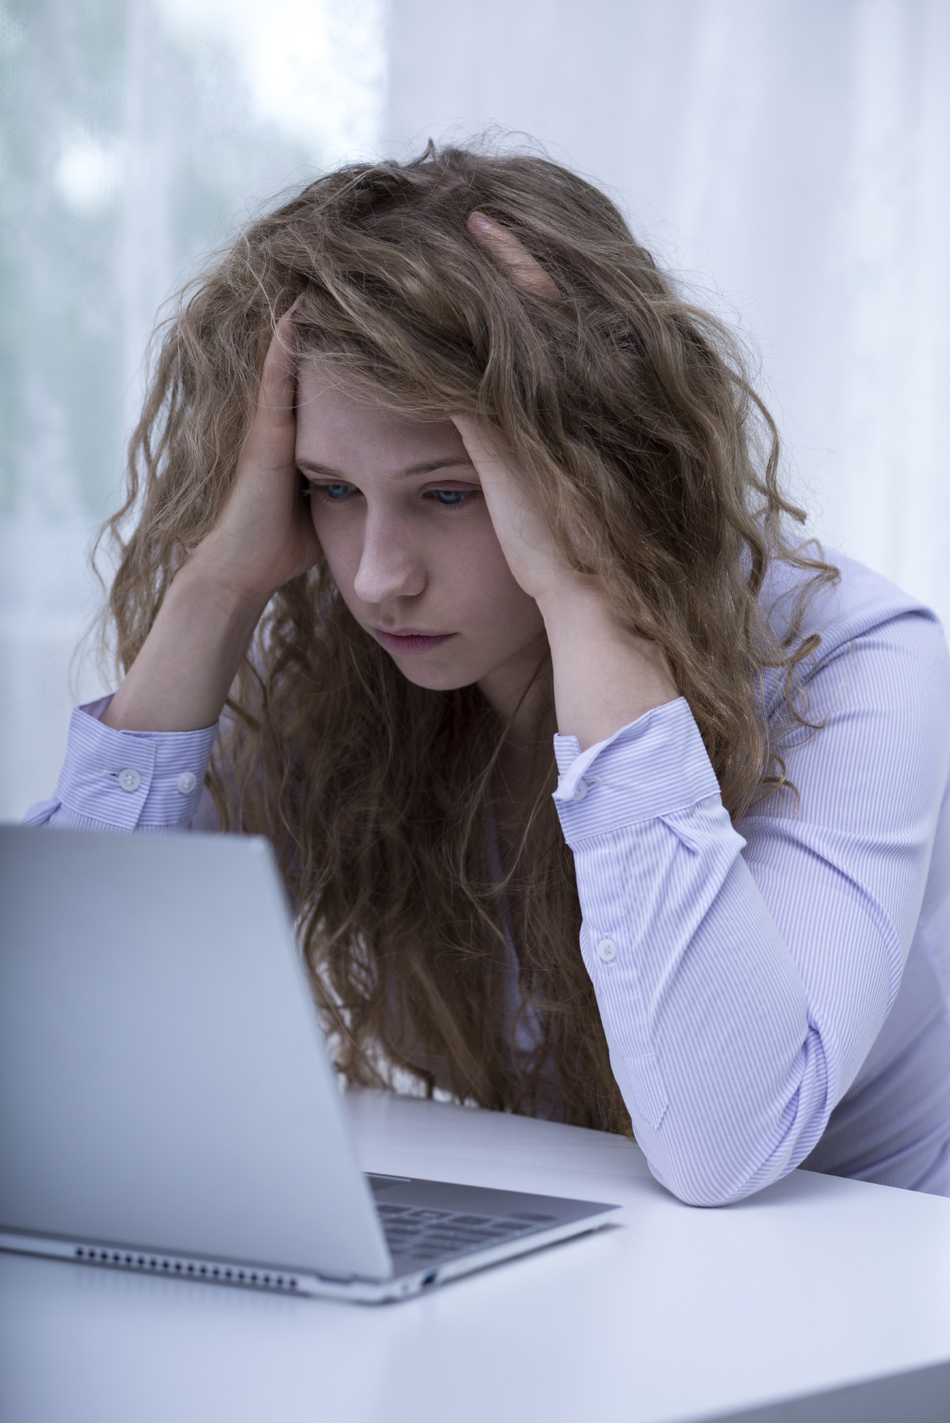 Calling All Teens: How to Deal with Cyberbullying